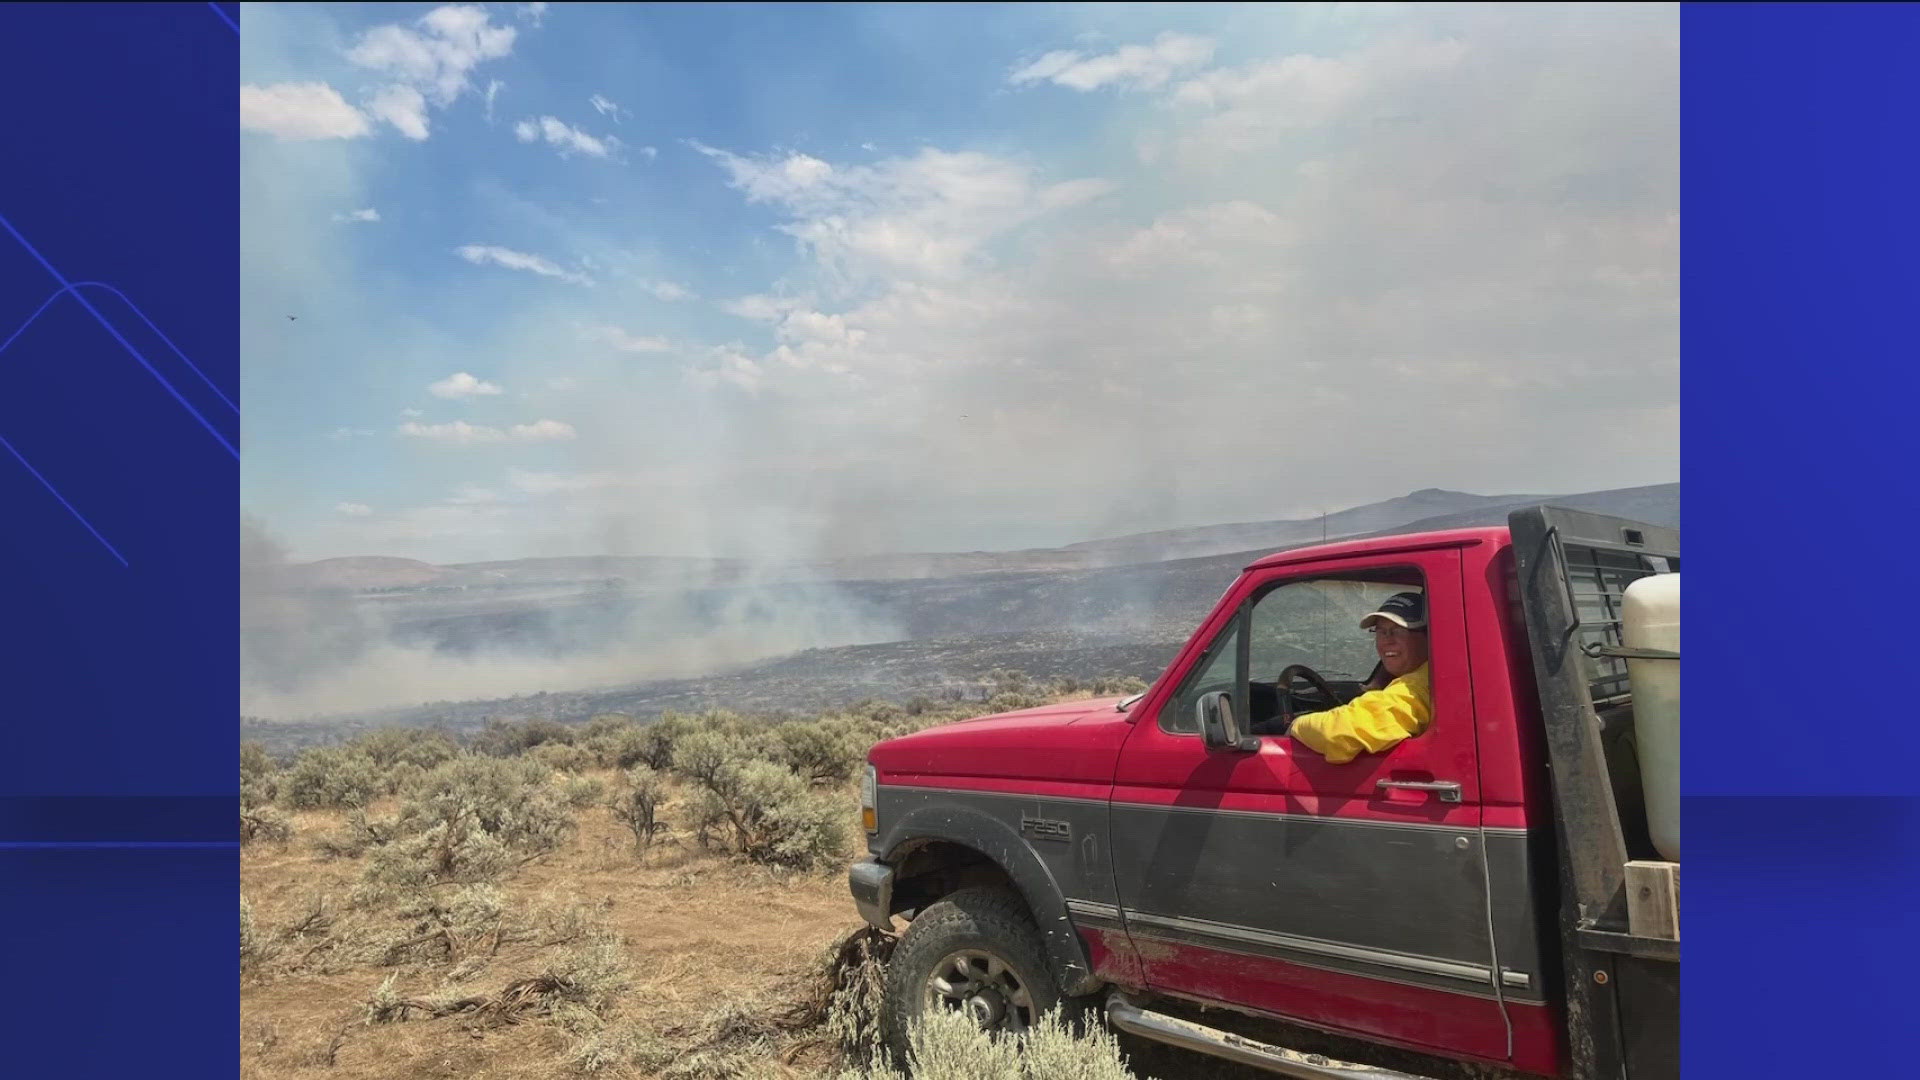 In an update, Vale BLM told KTVB the fire has grown to over 12,000 acres.